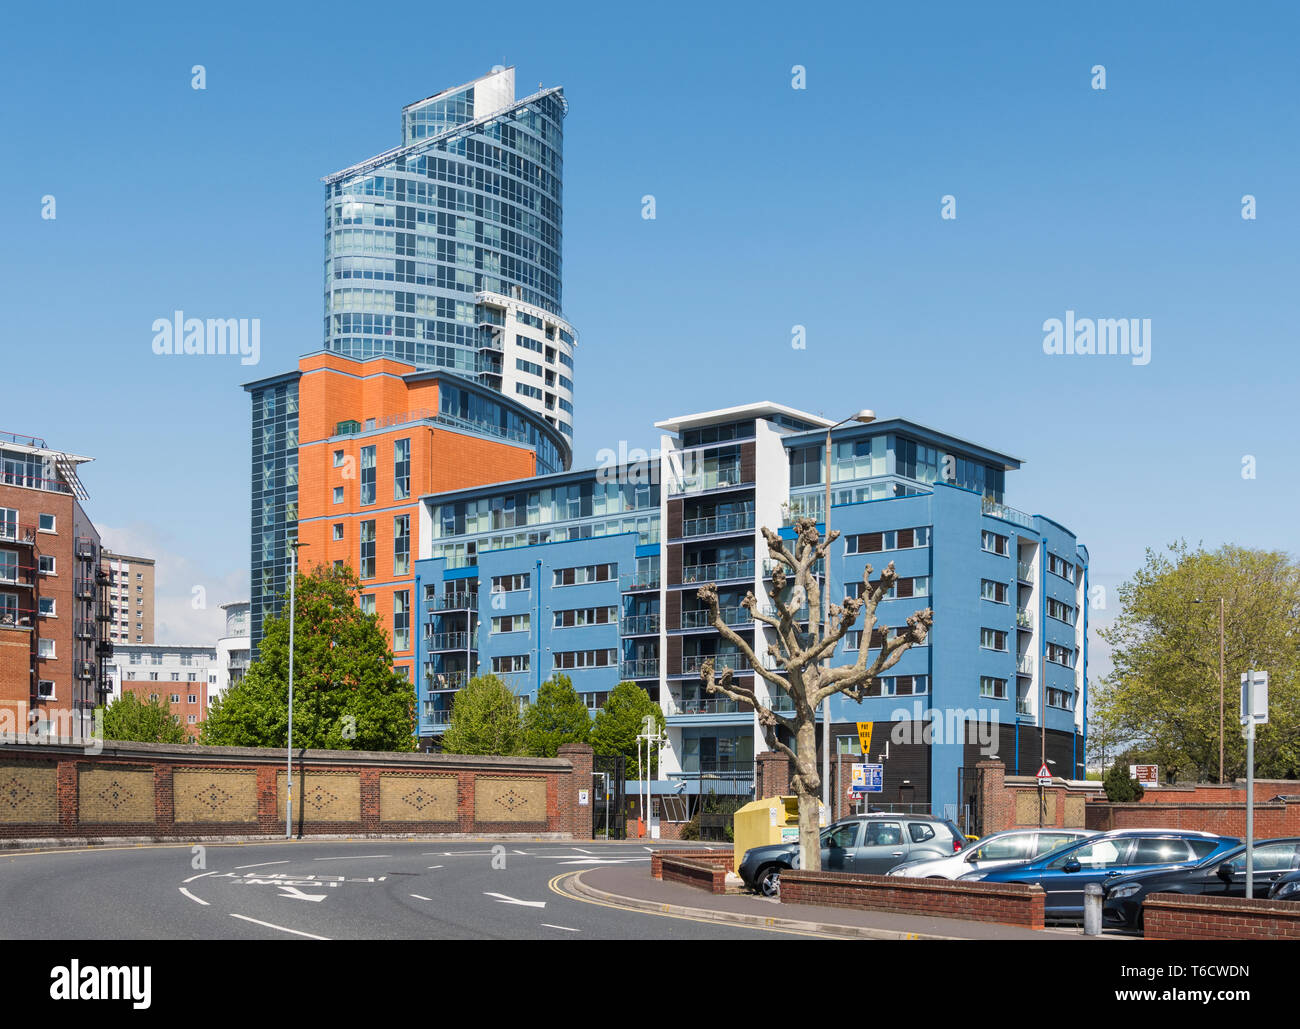 The Blue Building, part of the Work, Rest & Stay luxury apartments at Gunwharf Quays in Portsmouth, Hampshire, England, UK. Stock Photo